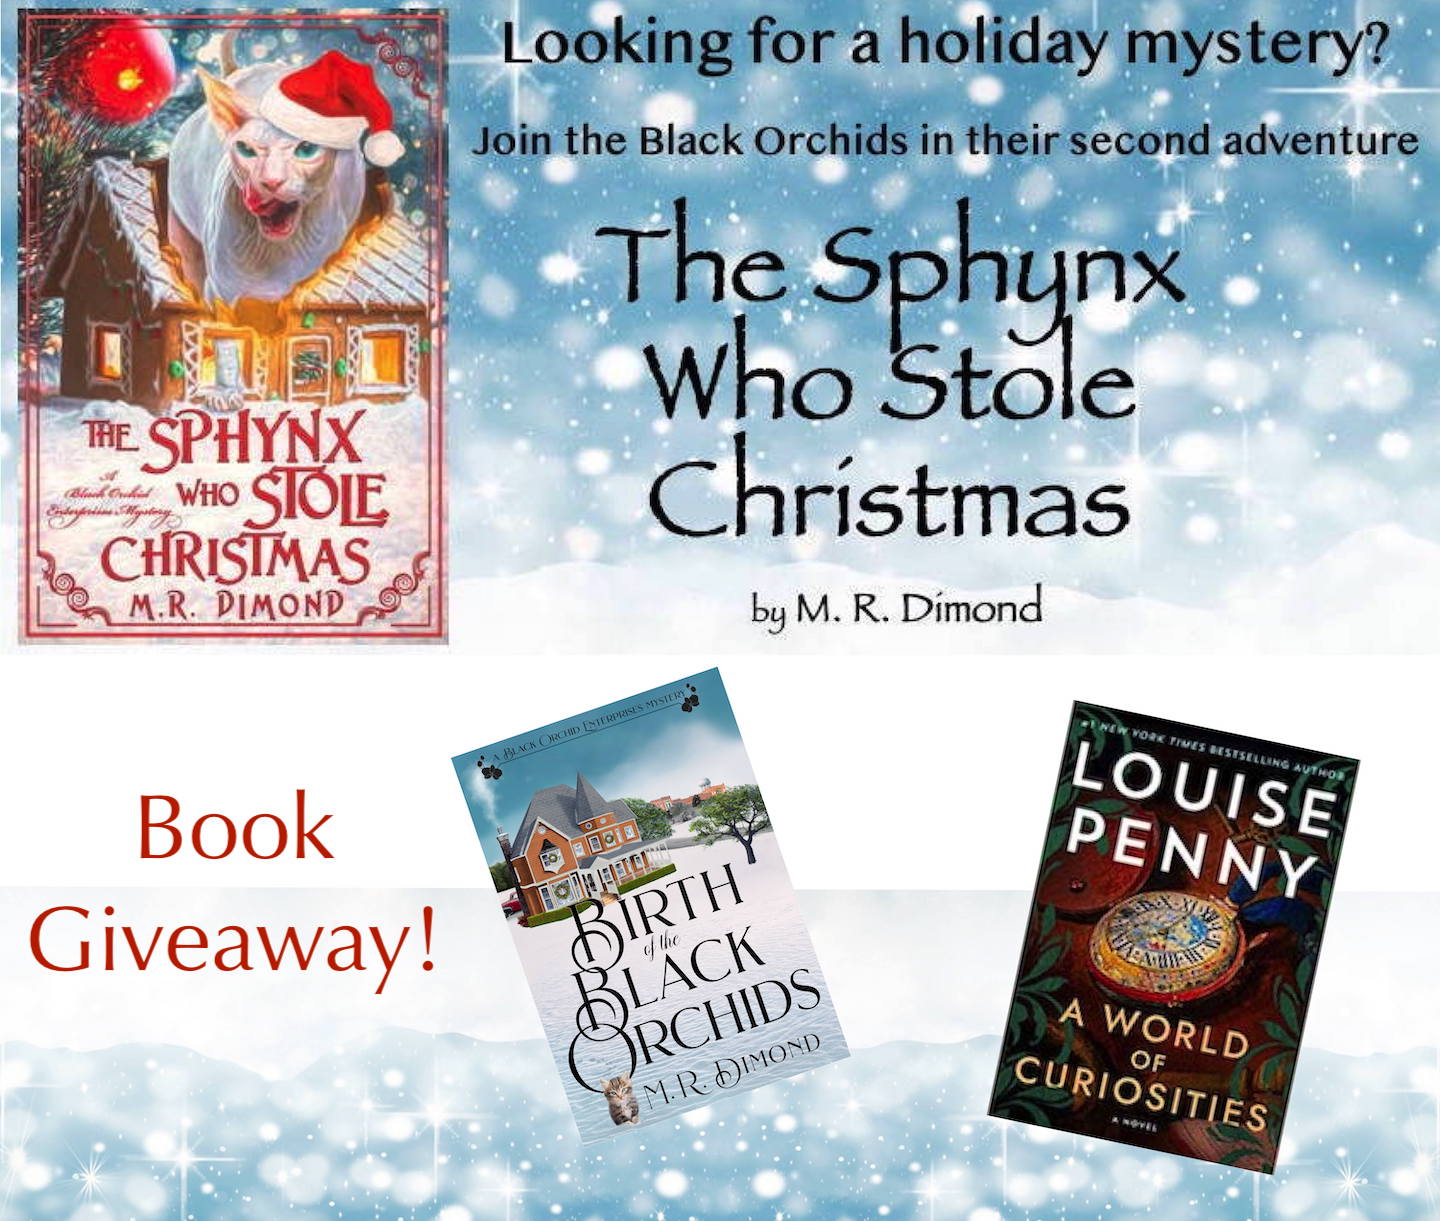 3 book covers, The Sphynx Who Stole Christmas, Birth of the Black Orchids, and Louise Penny's A World of Curiosities. Text announcing the publication of Sphynx and a book giveaway